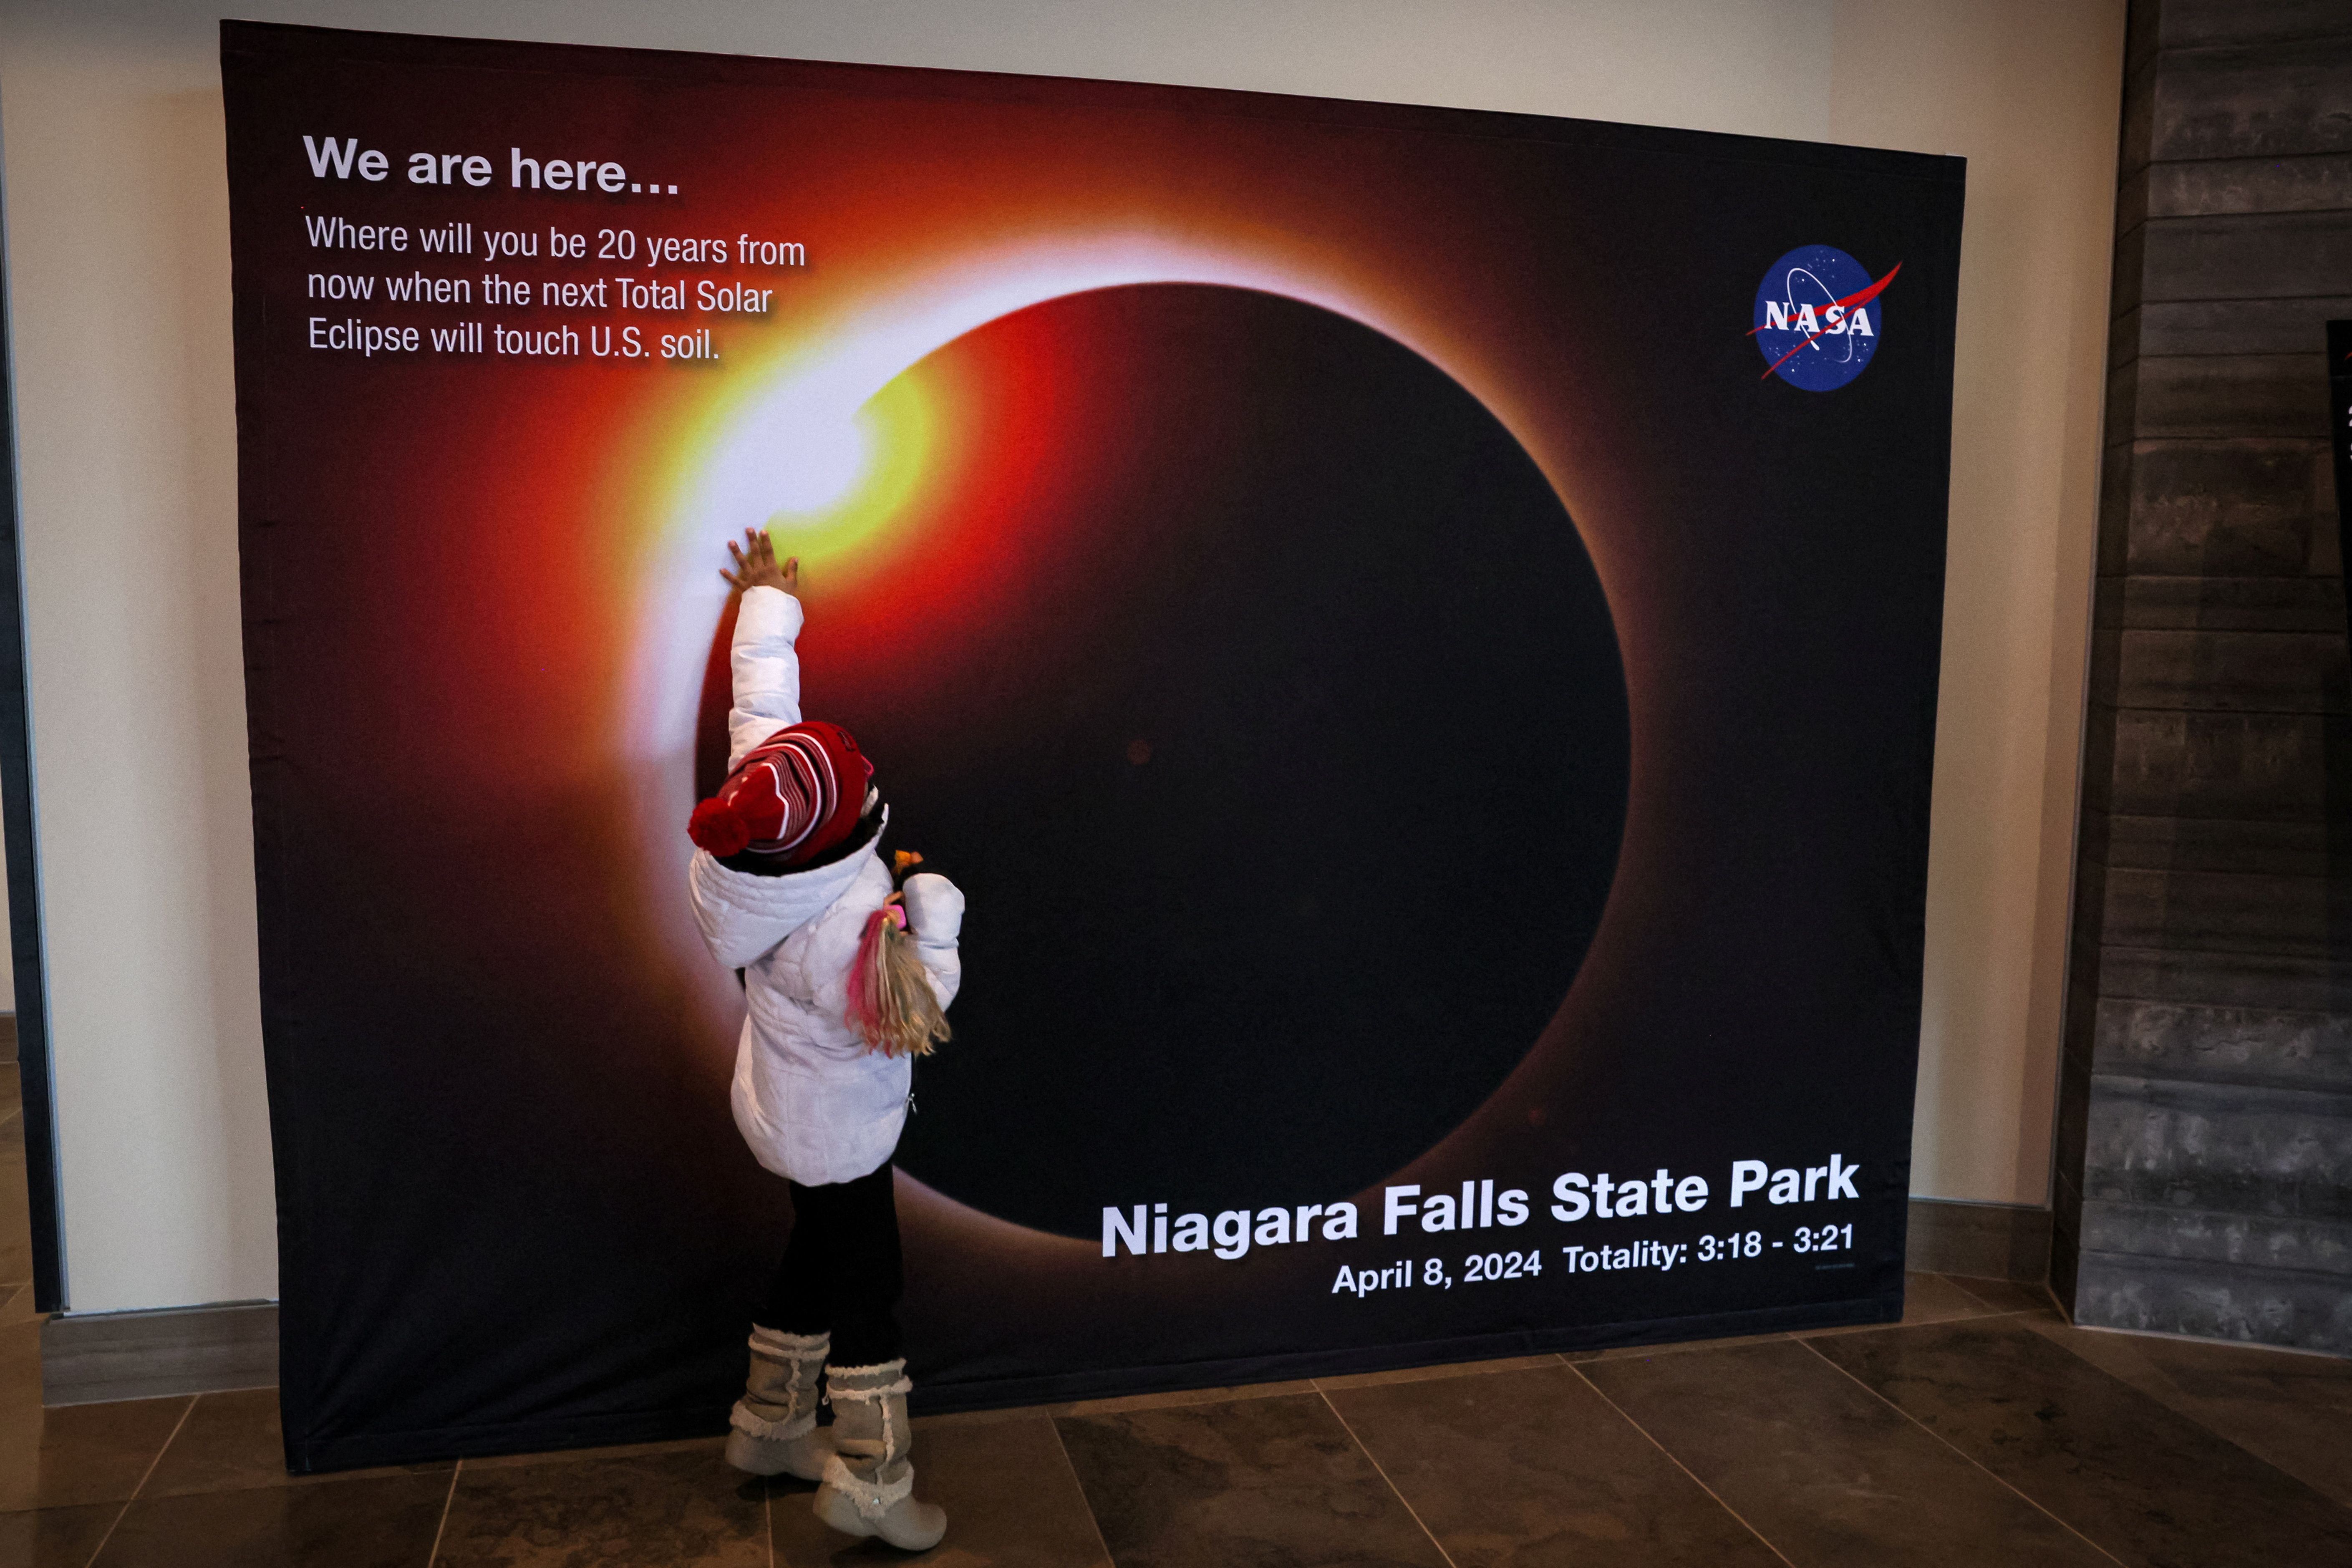 Solar Eclipse that will take place across parts of the United States and Canada on April 8, at Niagara Falls, New York